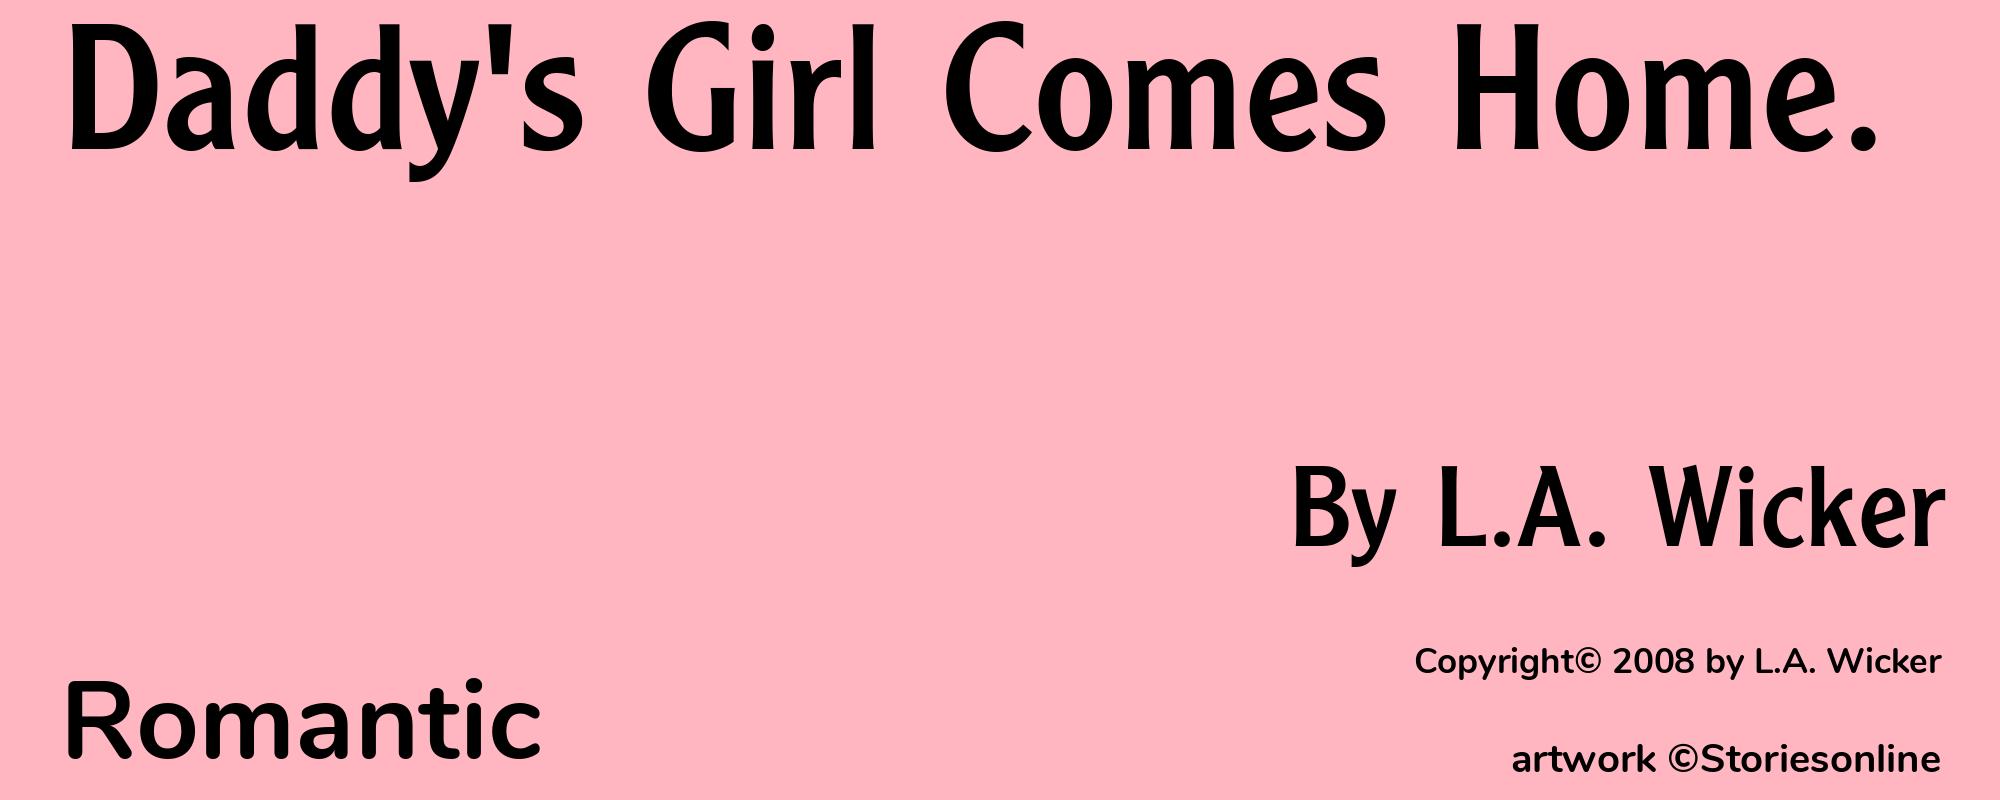 Daddy's Girl Comes Home. - Cover